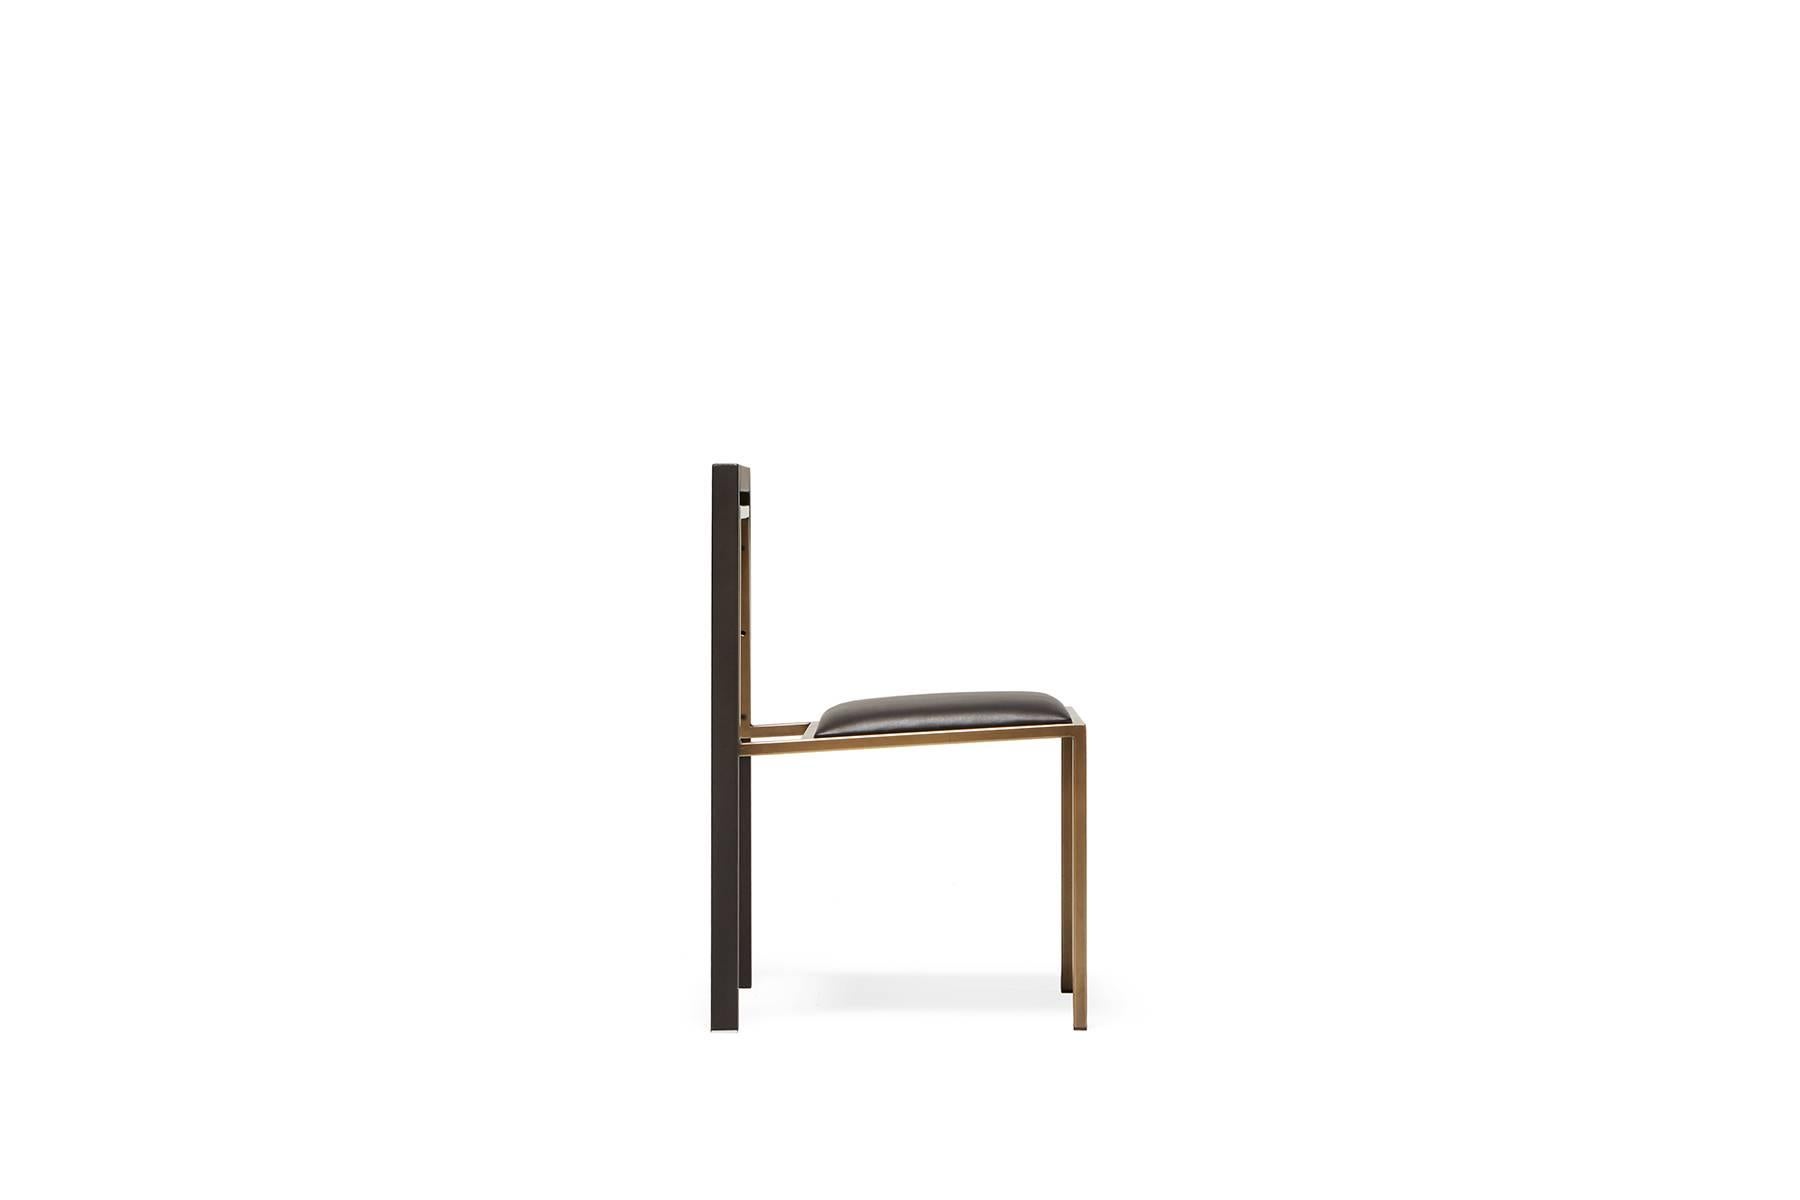 A steel and leather chair with a comfortable seat, easily stackable to save space when needed. This version has a steel frame with a brass finish, a blackened steel backrest, and a black leather upholstered seat. Also available in this collection is